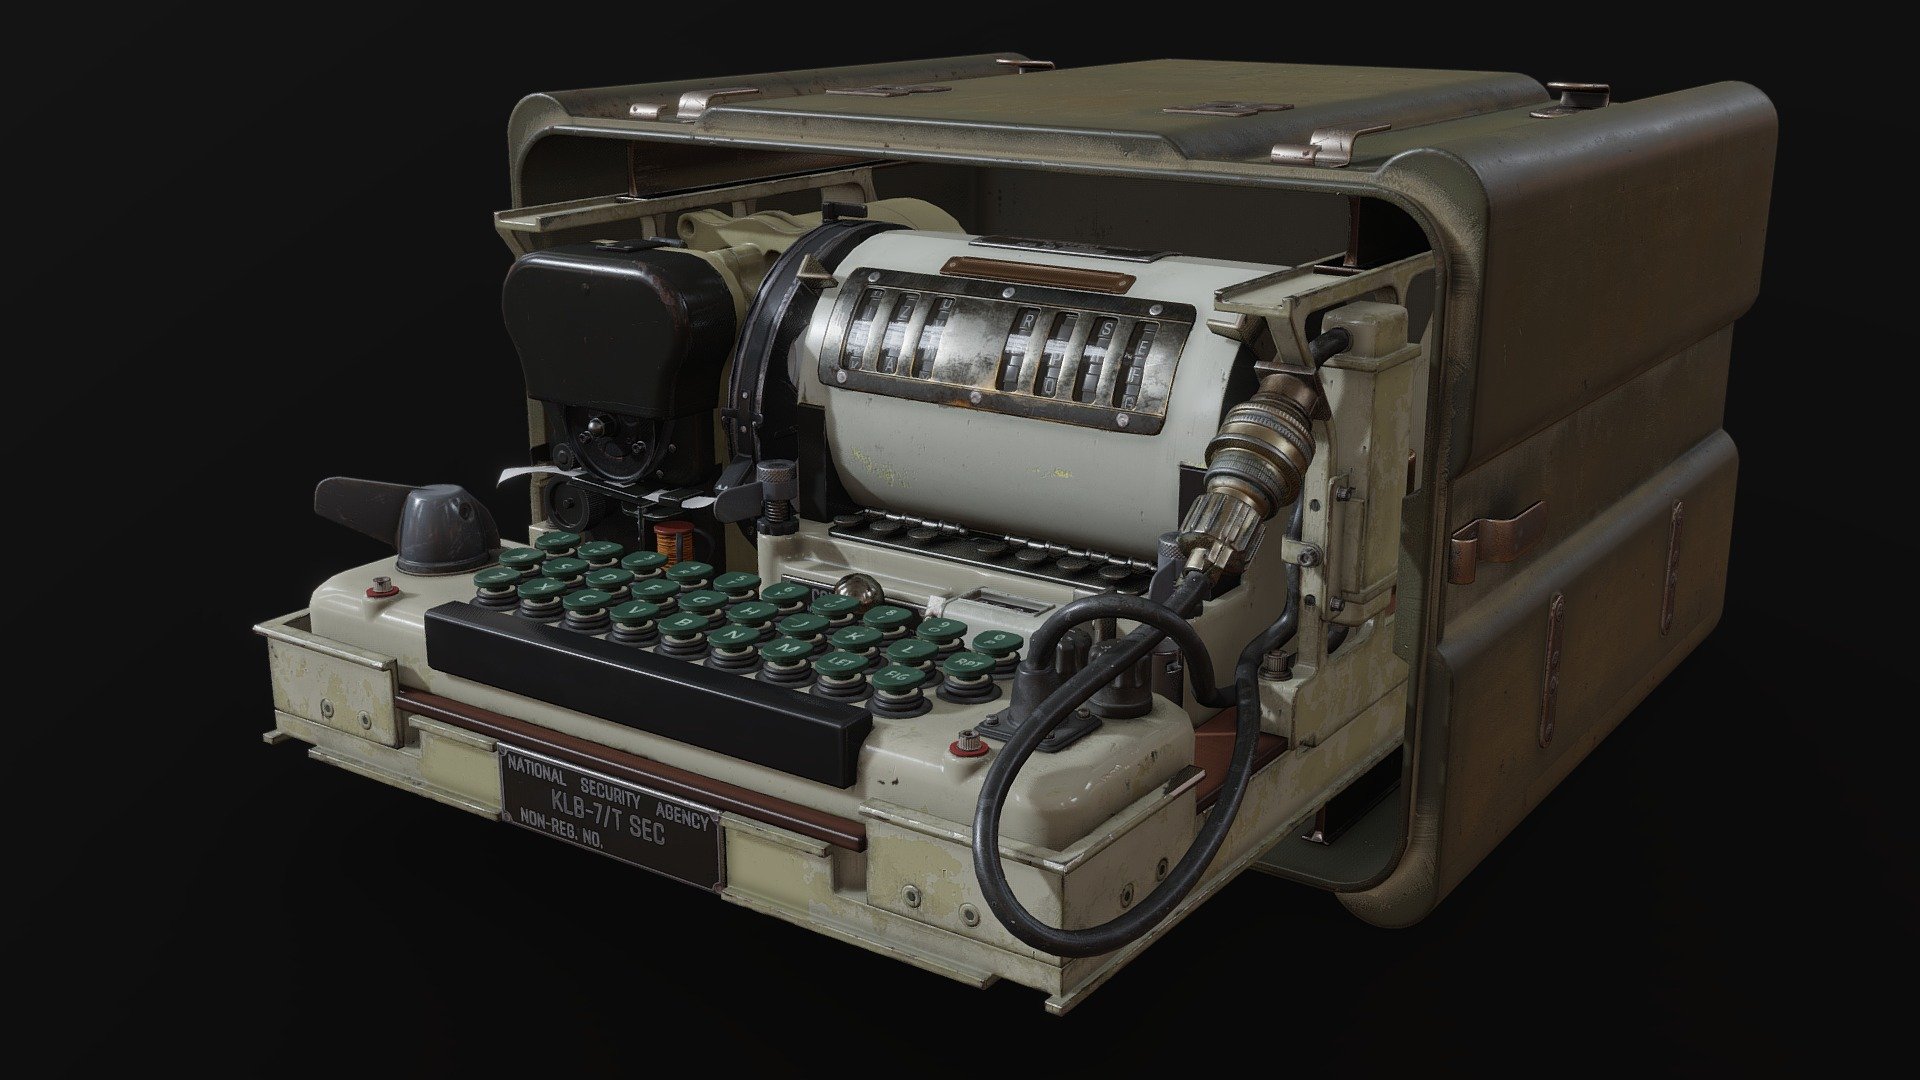 The KL-7 Adonis was a rotor cipher machine used by the United States government for secure communication during the Cold War. It was used by various government agencies and military units for the secure transmission of classified information.

More renders on artstation: https://www.artstation.com/artwork/VyAPmP



Modelled in vanilla Blender, baked and textured in Substance Painter

3 x 4096x4096 PBR Texture Sets - KL-7/T SEC | Adonis - Buy Royalty Free 3D model by shash_wut (@Shashwat.Patkar.Sh) 3d model